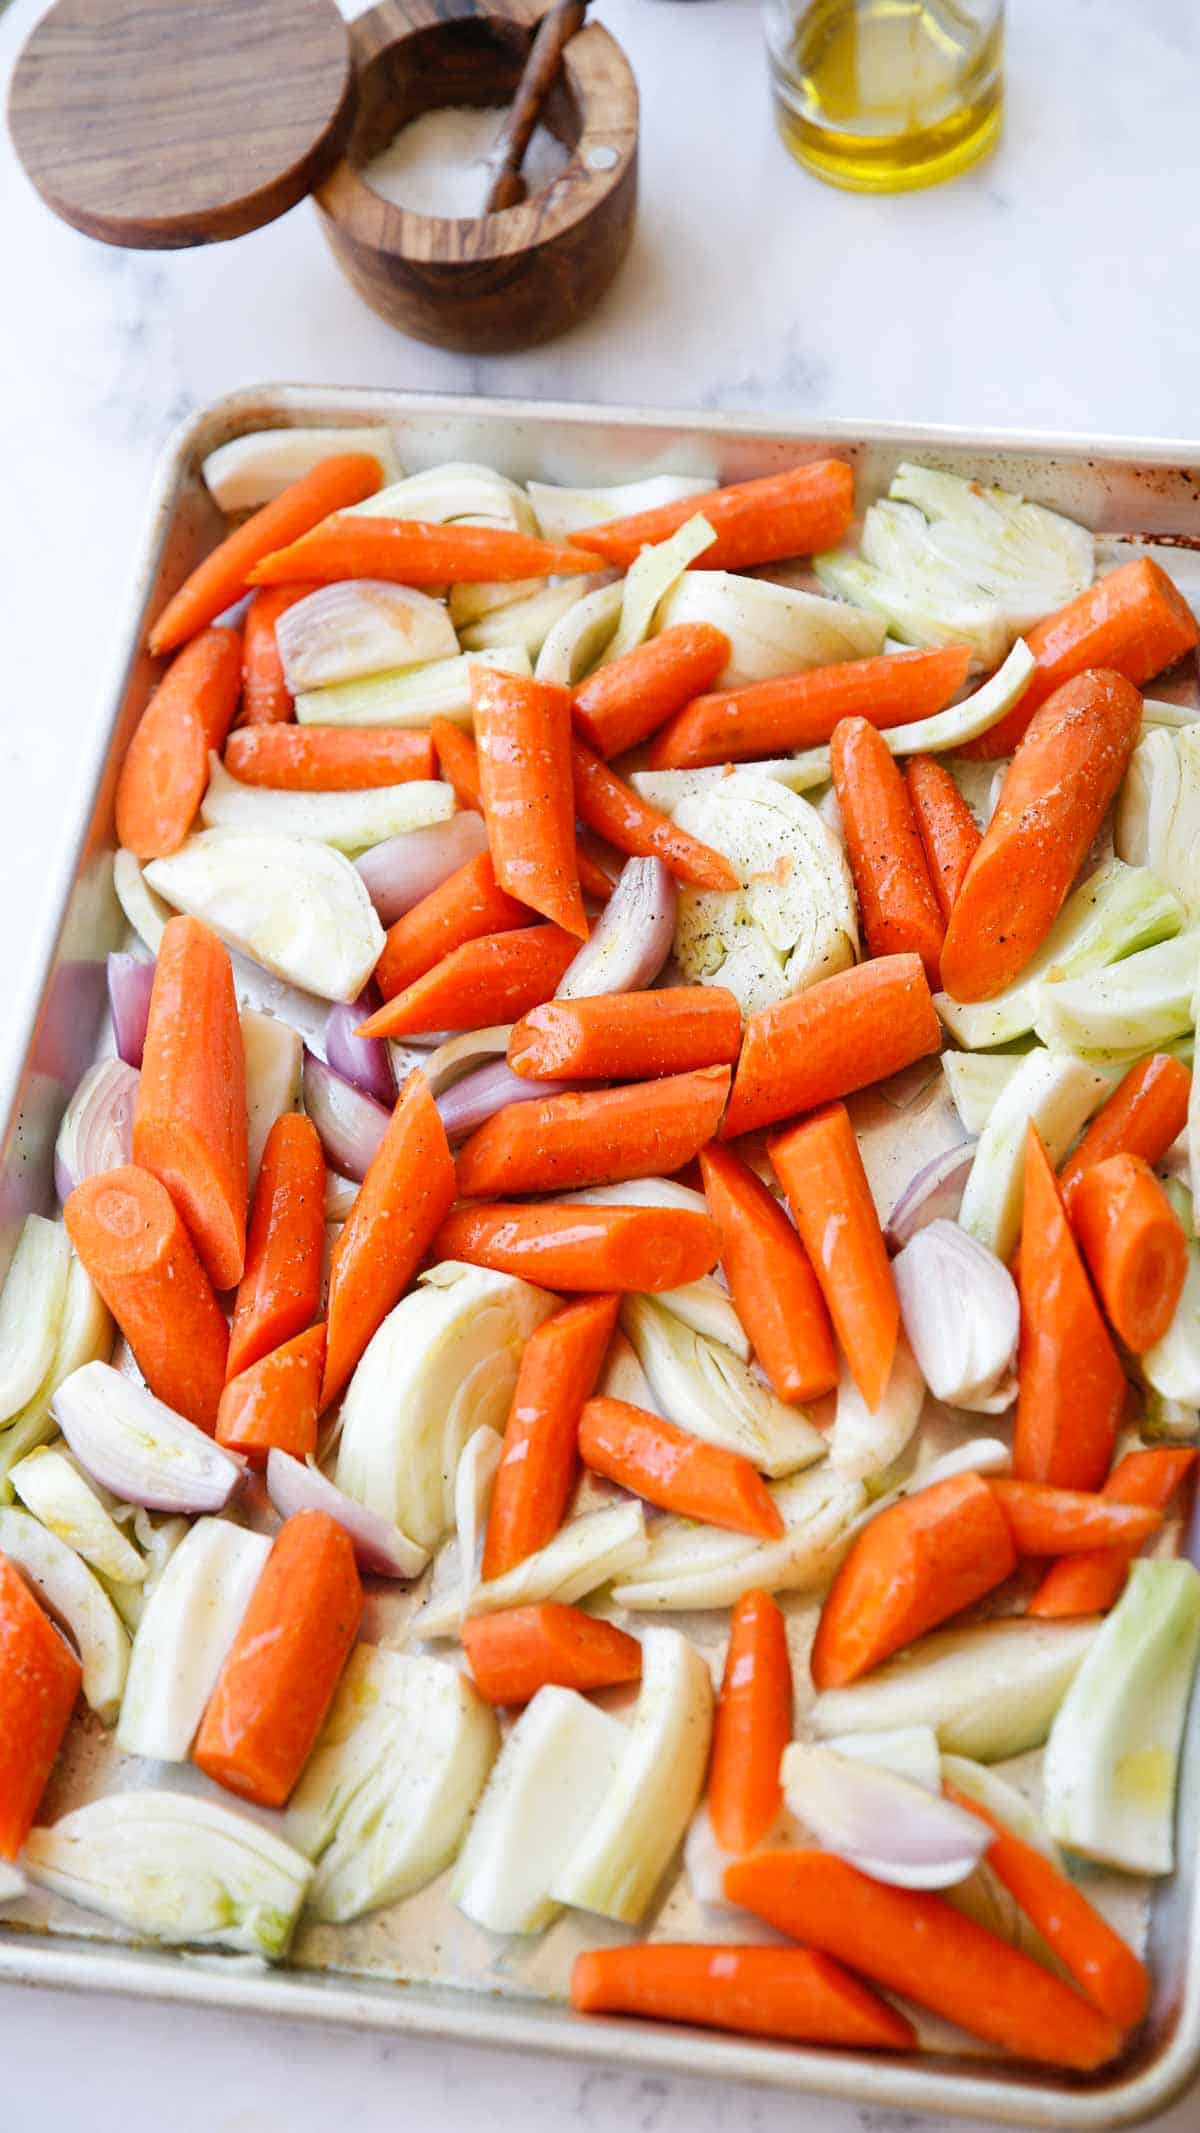 a baking tray loaded with carrots and fennel and shallots